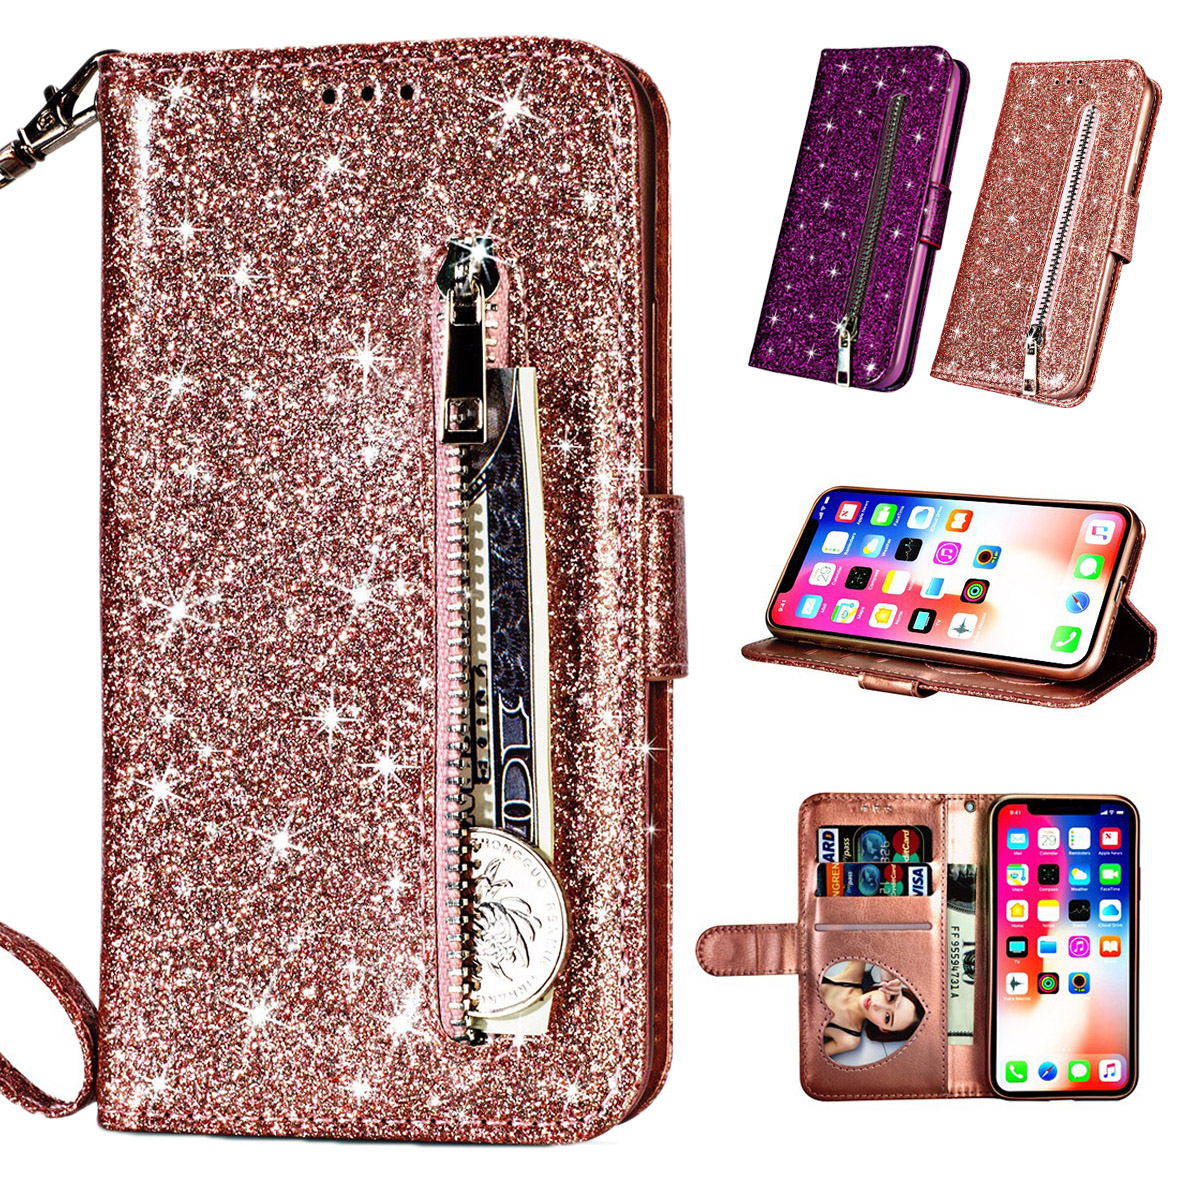 

Bling Glitter Luxury Flip PU Leather Zipper Wallet Phone Bag with Multi Card Slots Stand Protective Case for iPhone 11 / iP XR / iP 7 / iP 8